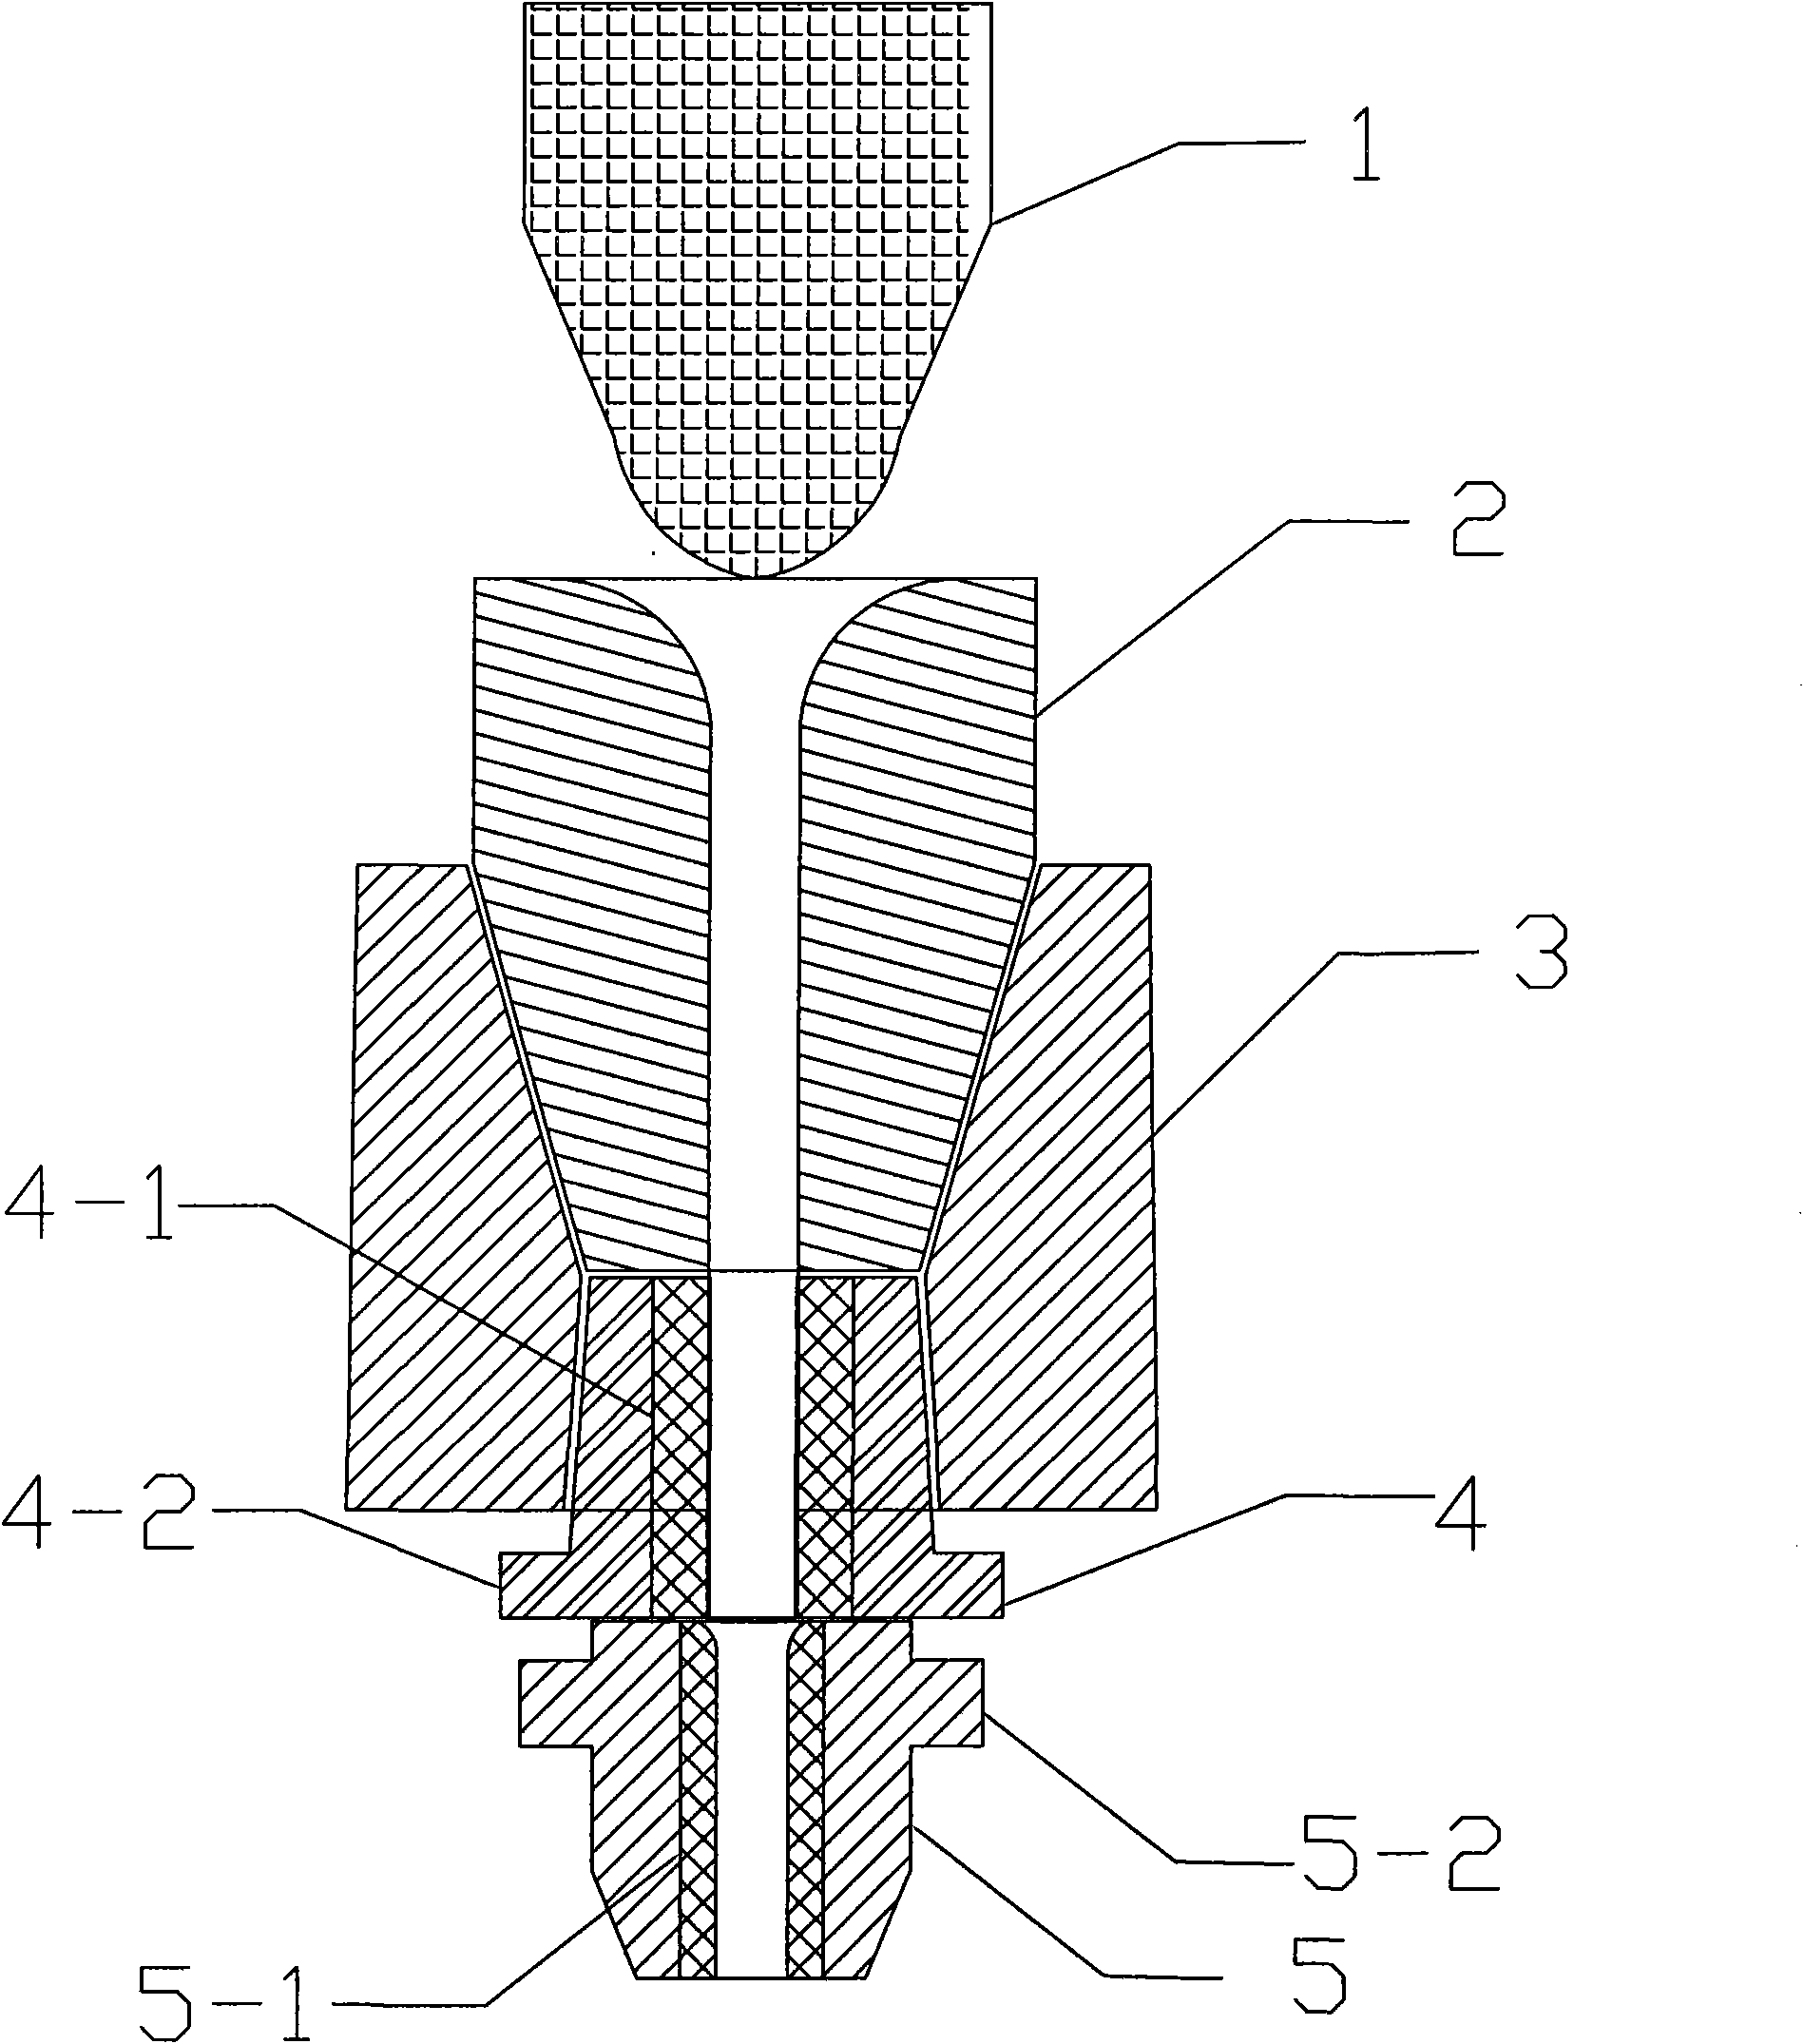 Tundish control flow method of small square billet continuous casting stopper rod and tundish water gap